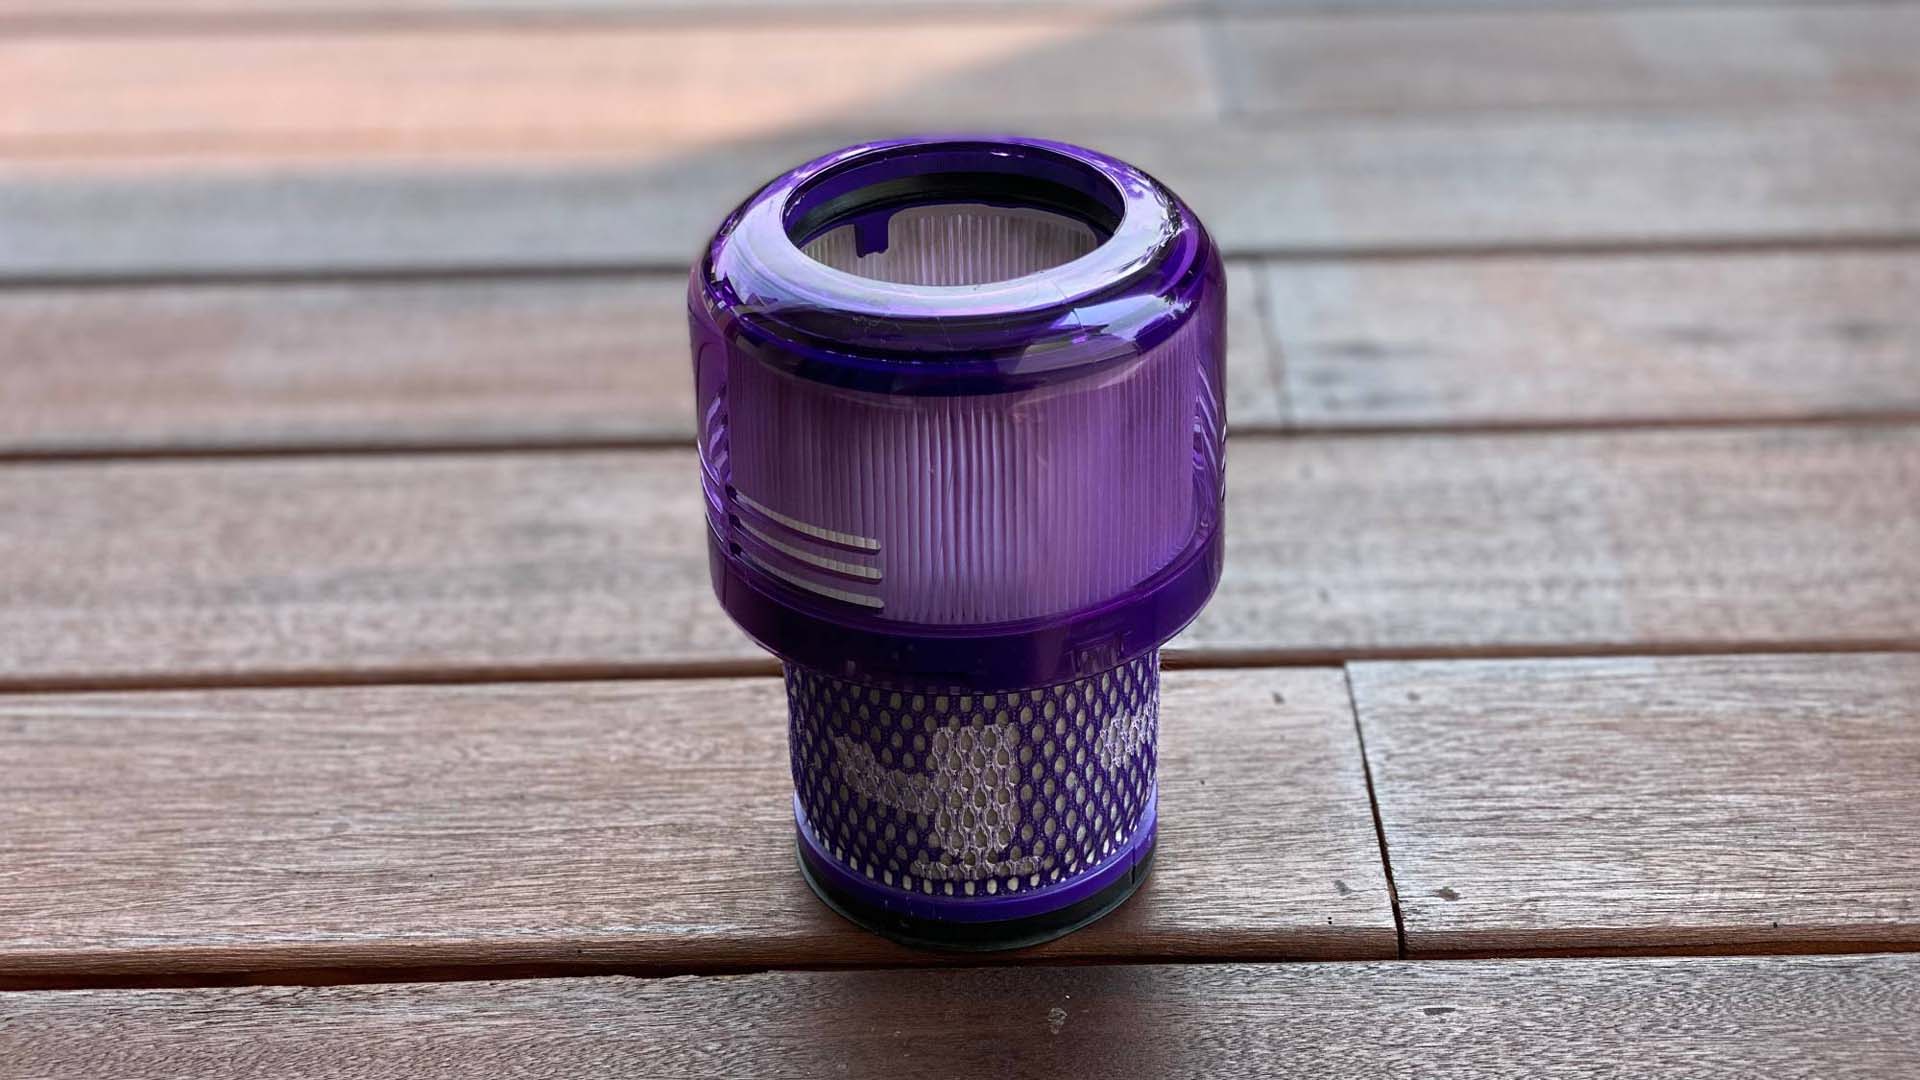 Dyson filters are designed to catch microscopic dust particles than can build up over time